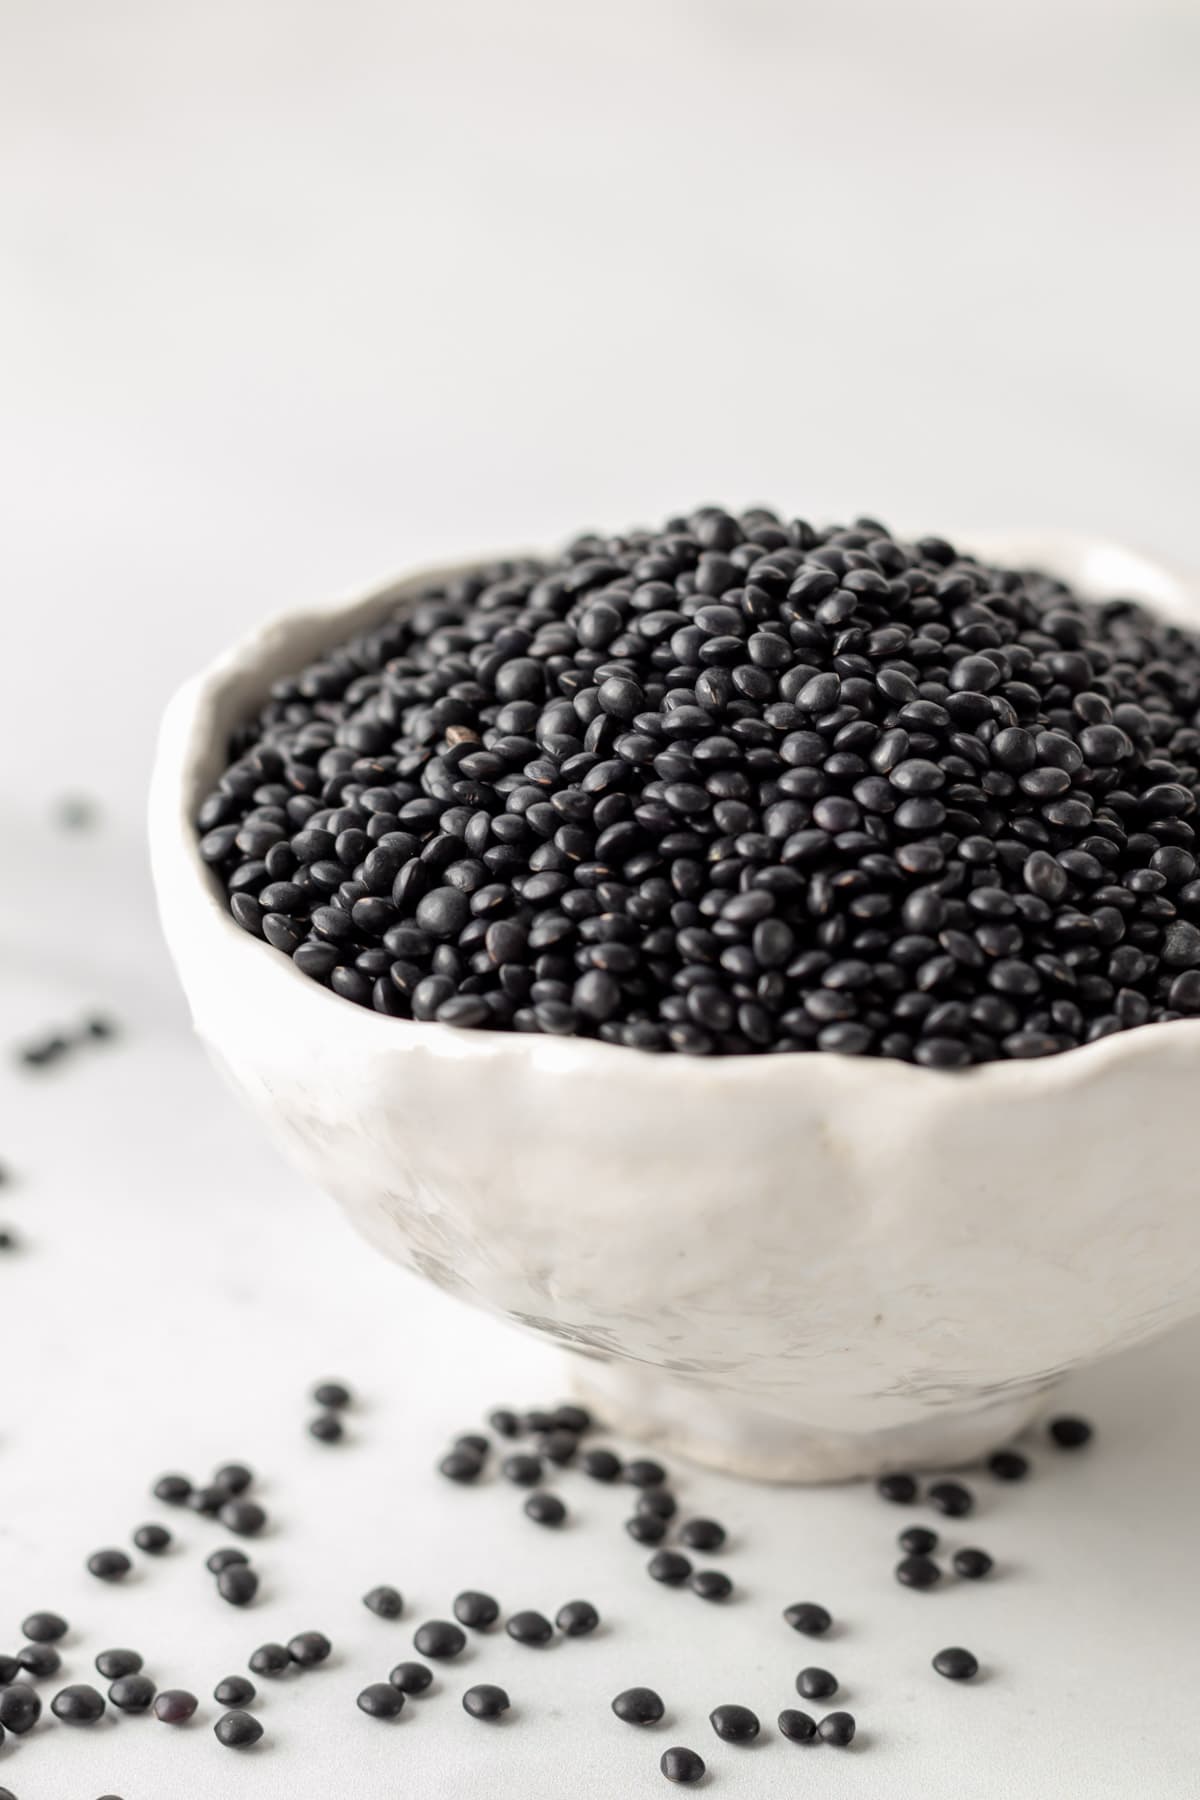 Dried black lentils in a small white bowl.